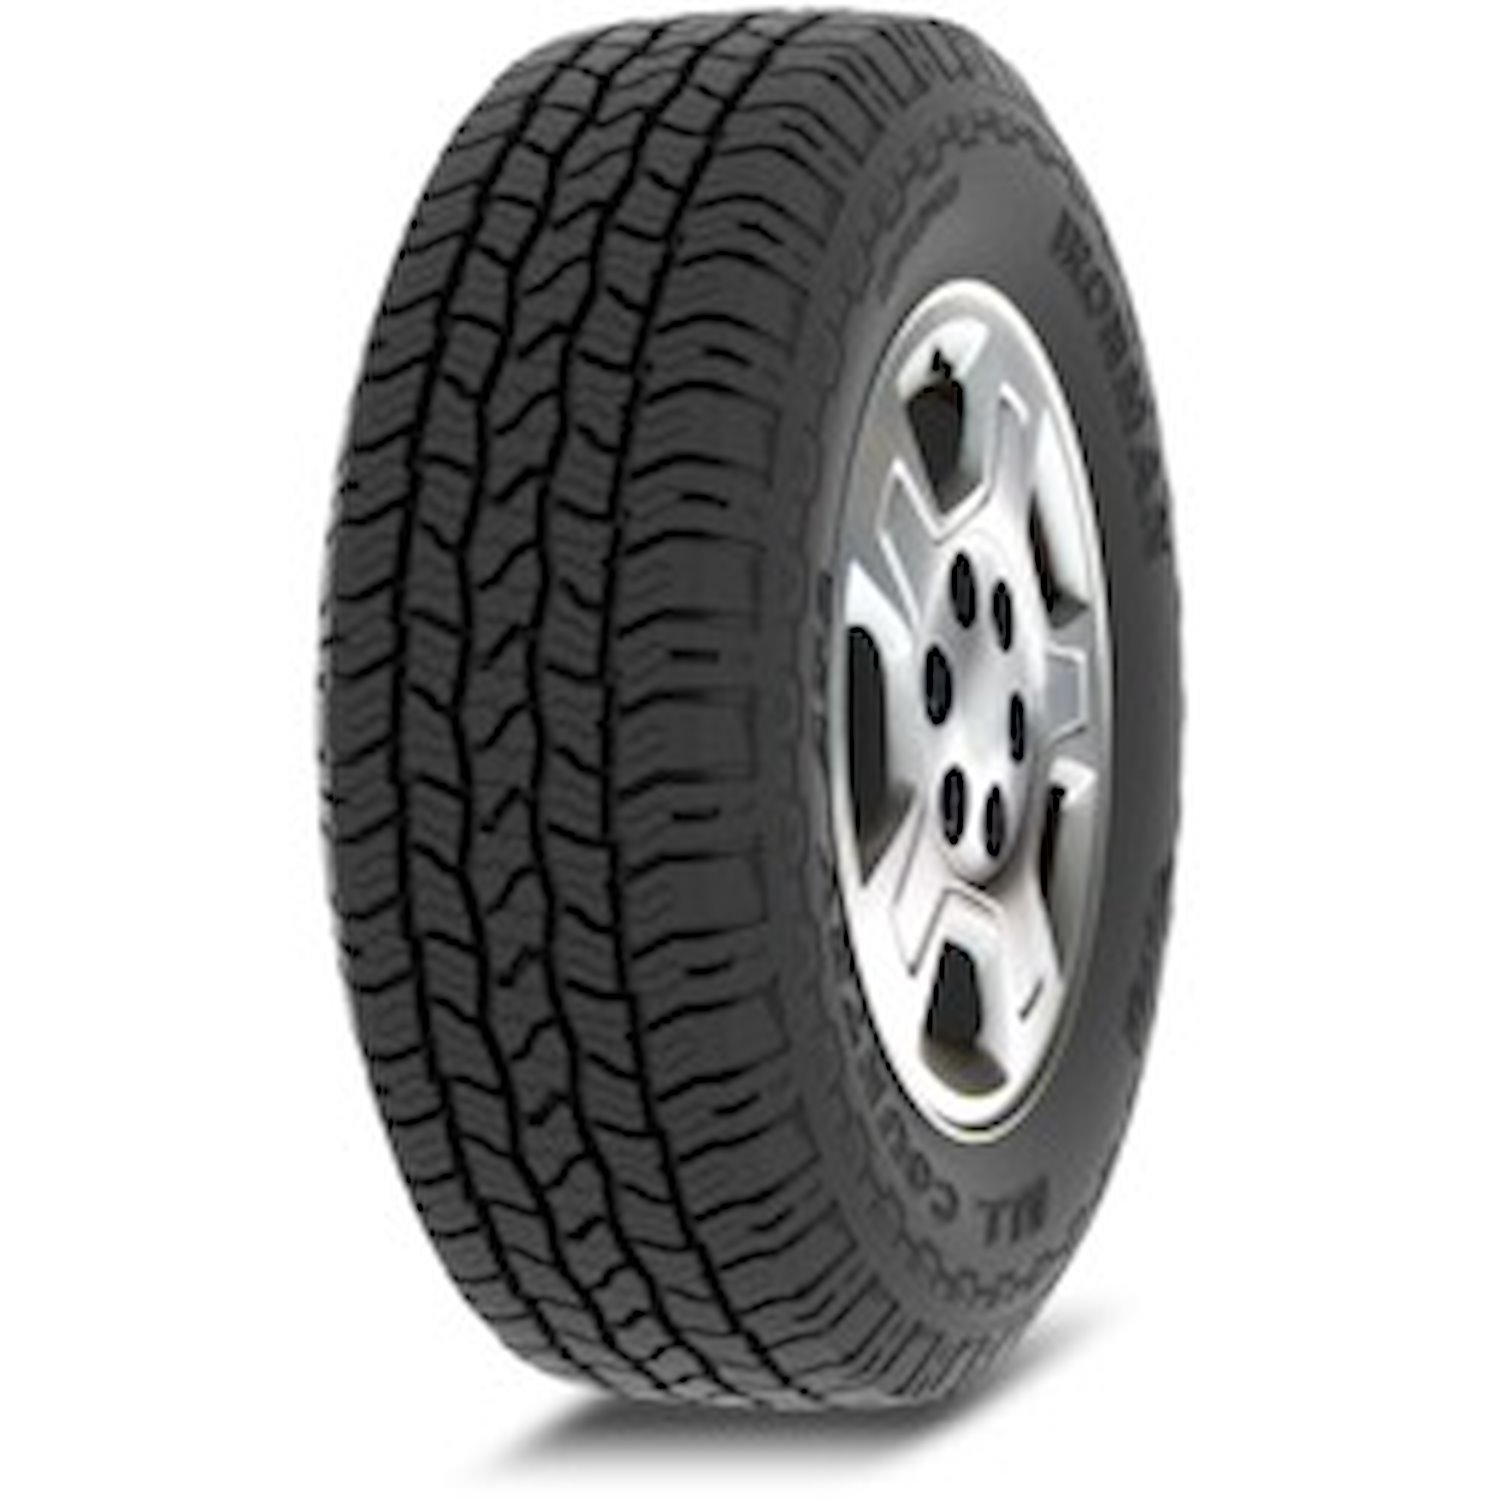 07674 All Country AT2 Tire, LT265/70R17, 121/118R